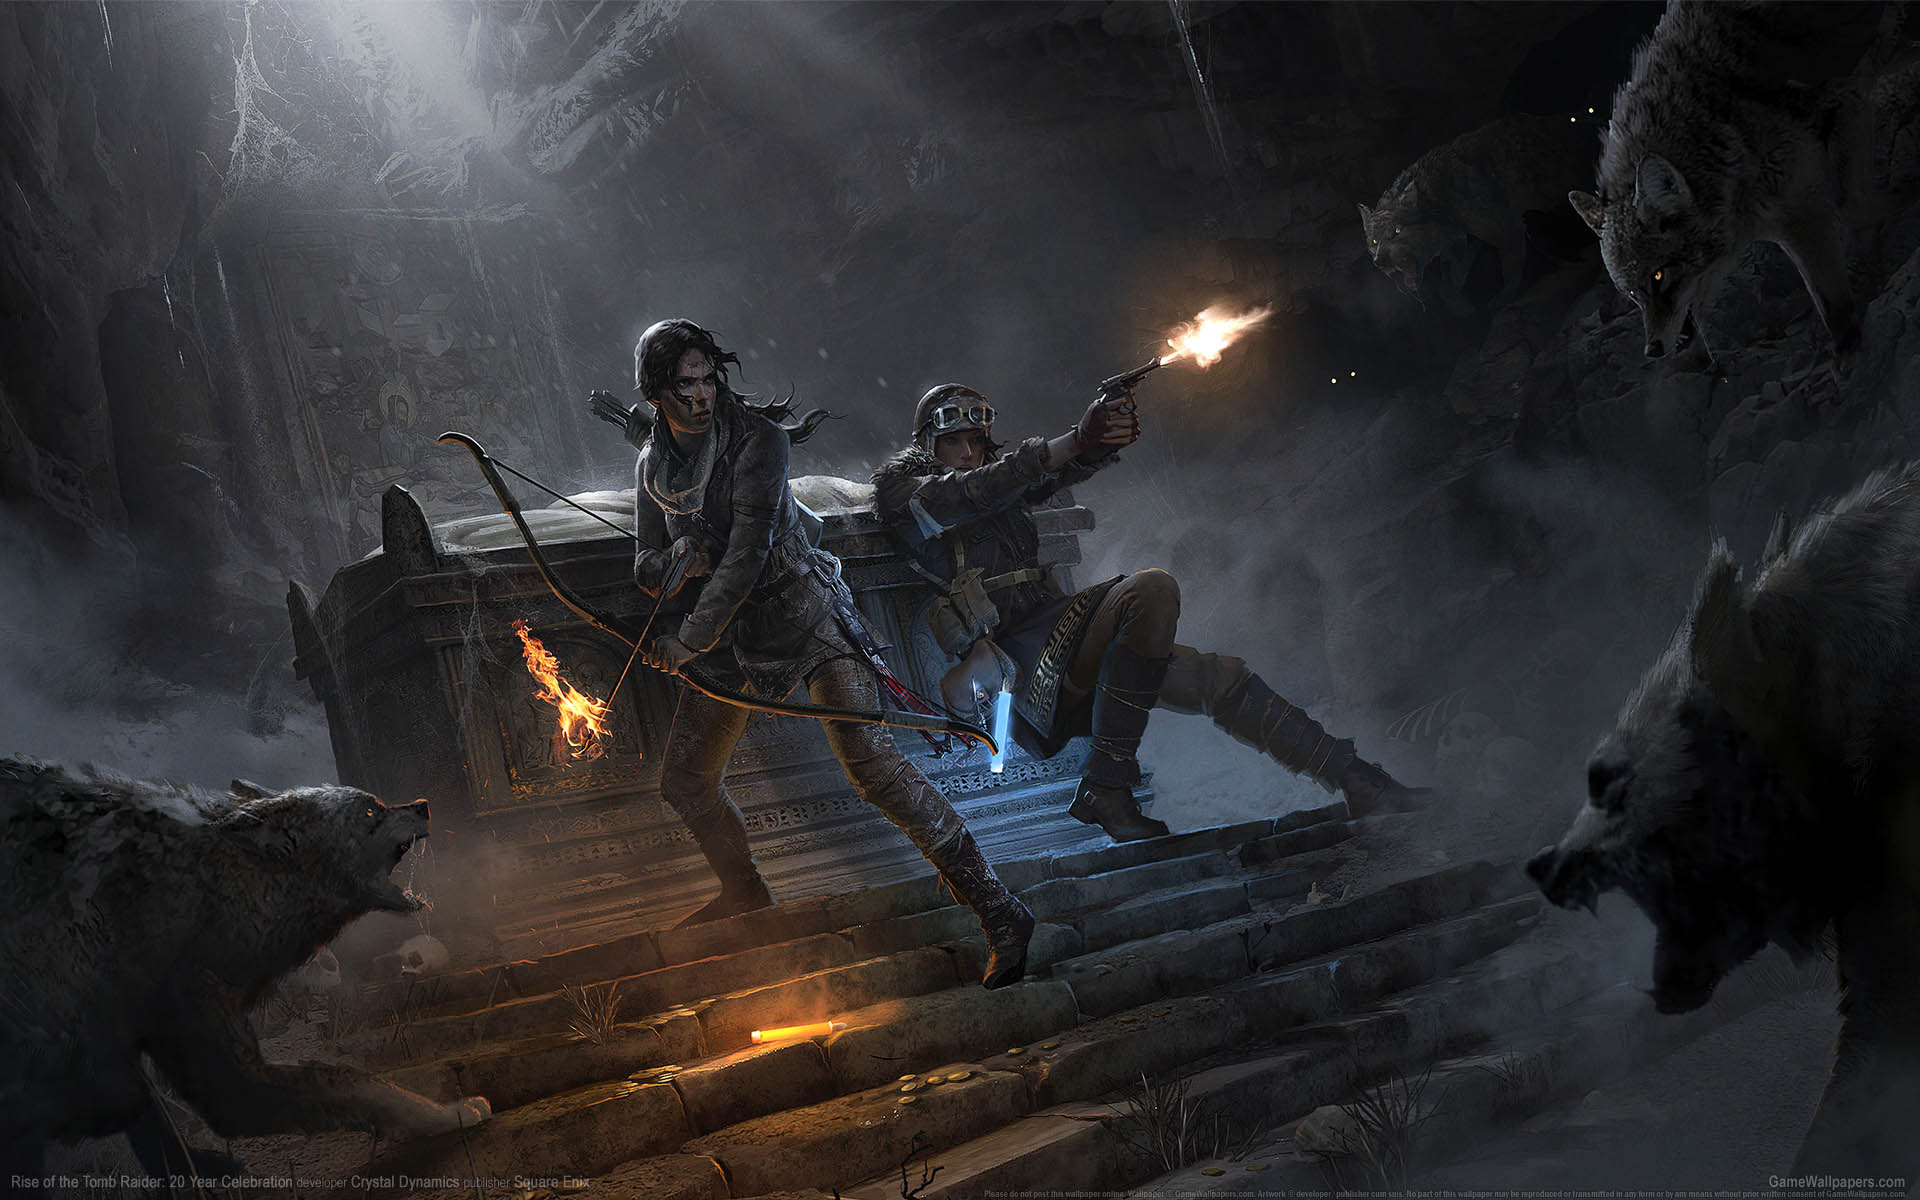 Rise of the Tomb Raider: 20 Year Celebration wallpaper 01 1920x1200